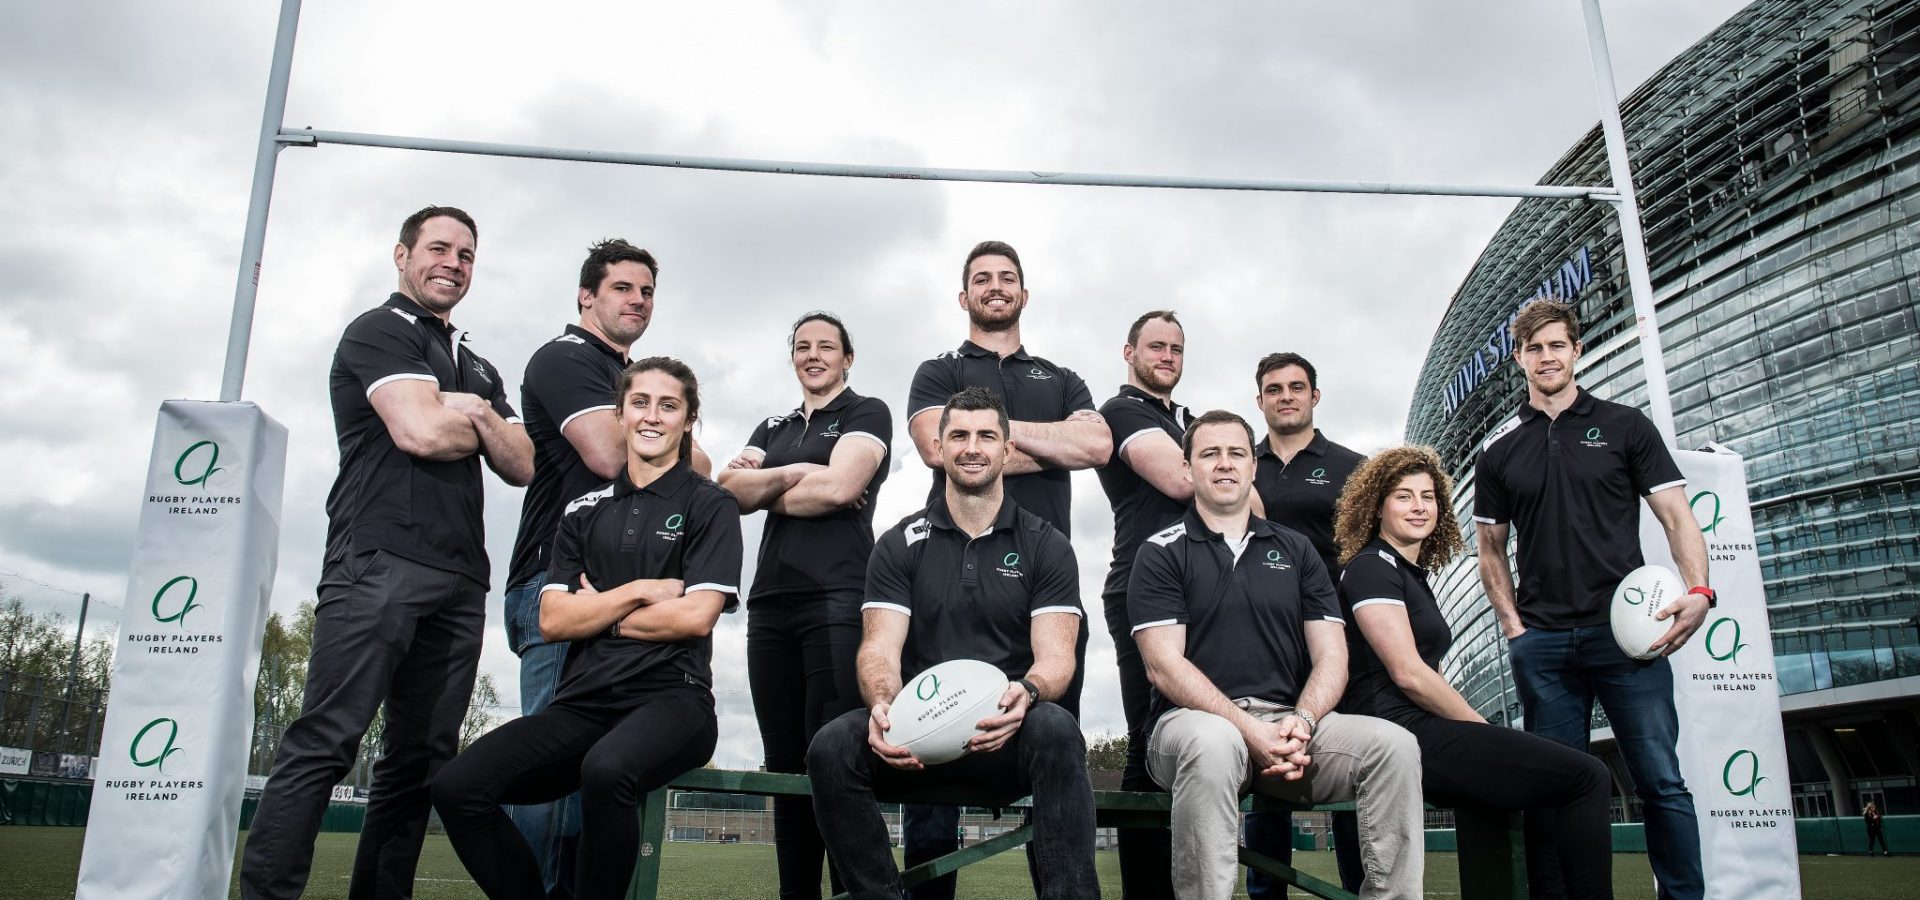 IRUPA BECOMES RUGBY PLAYERS IRELAND